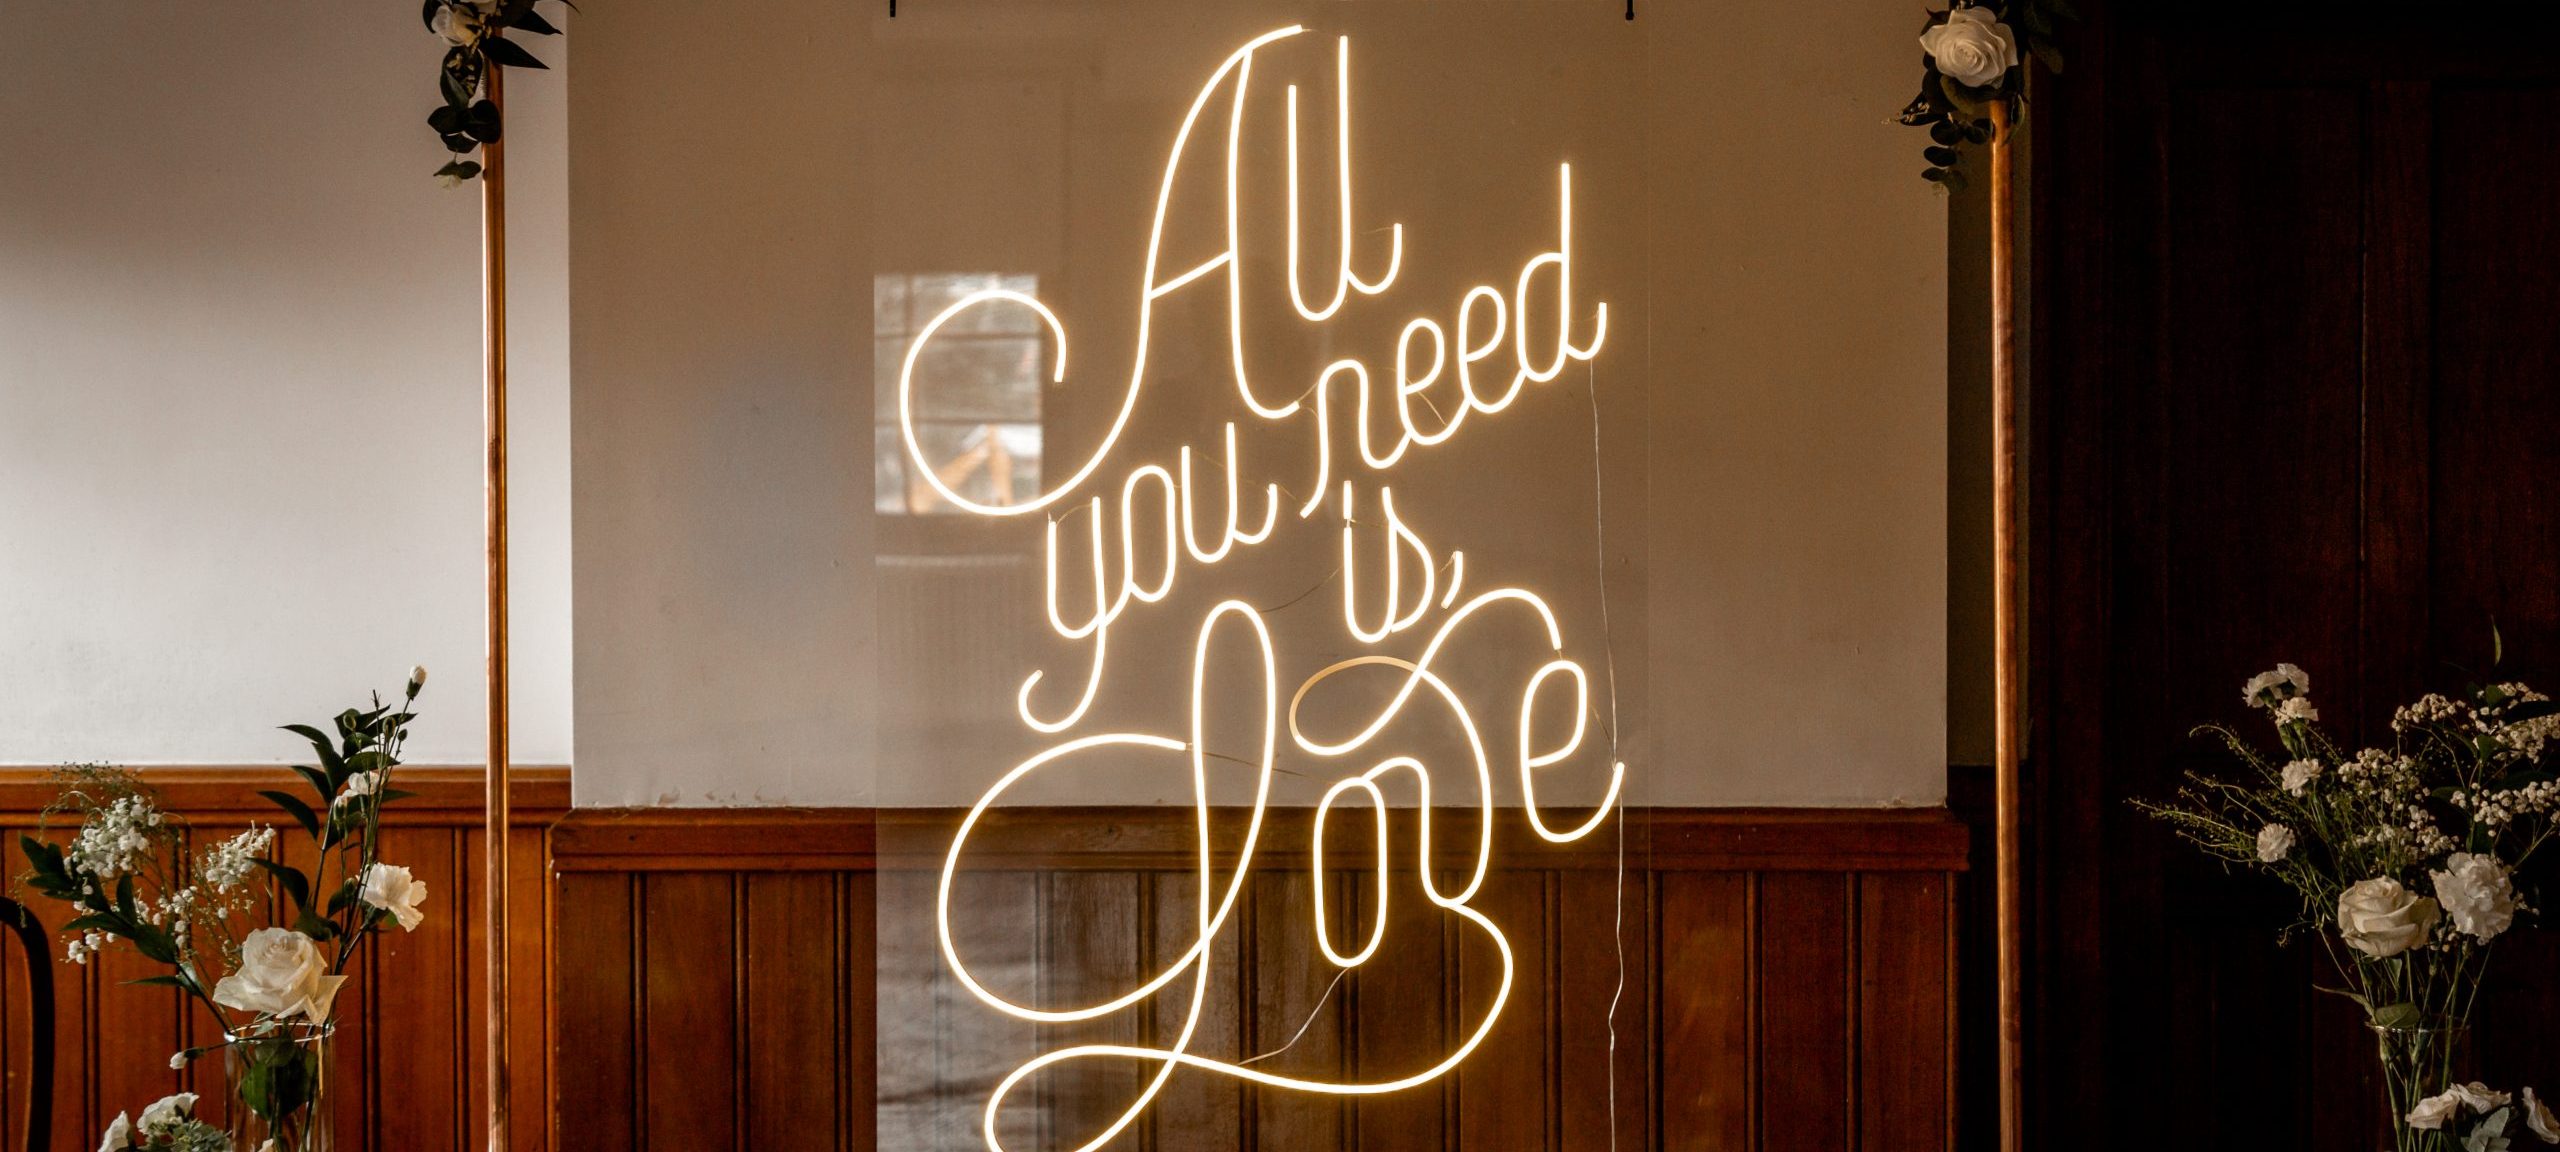 "All you need is love" neon sign